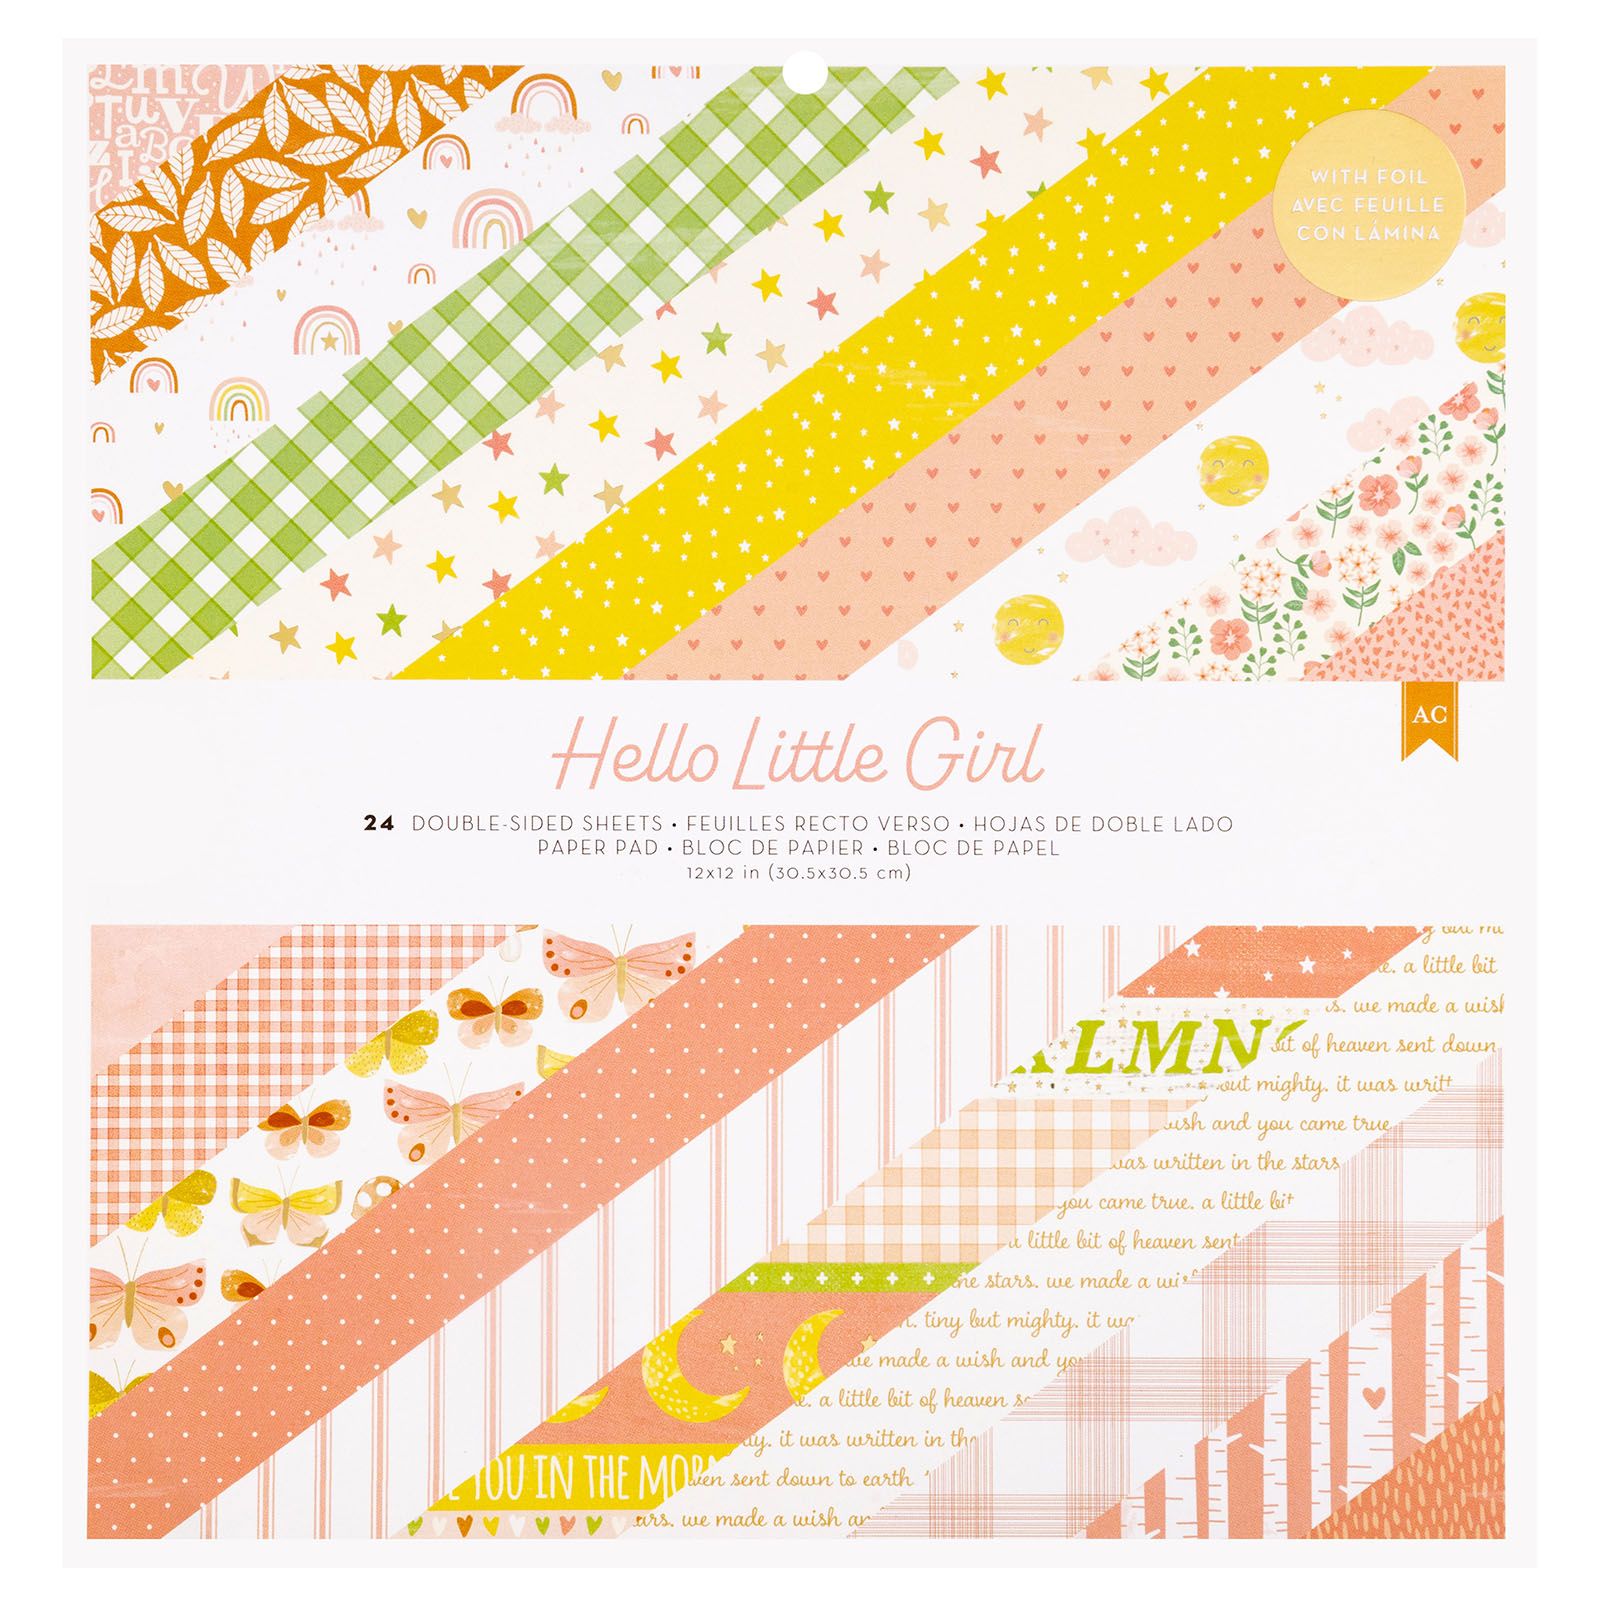 Hello Little Girl Paper Pad 12" / Block Papel Hola Pequeña